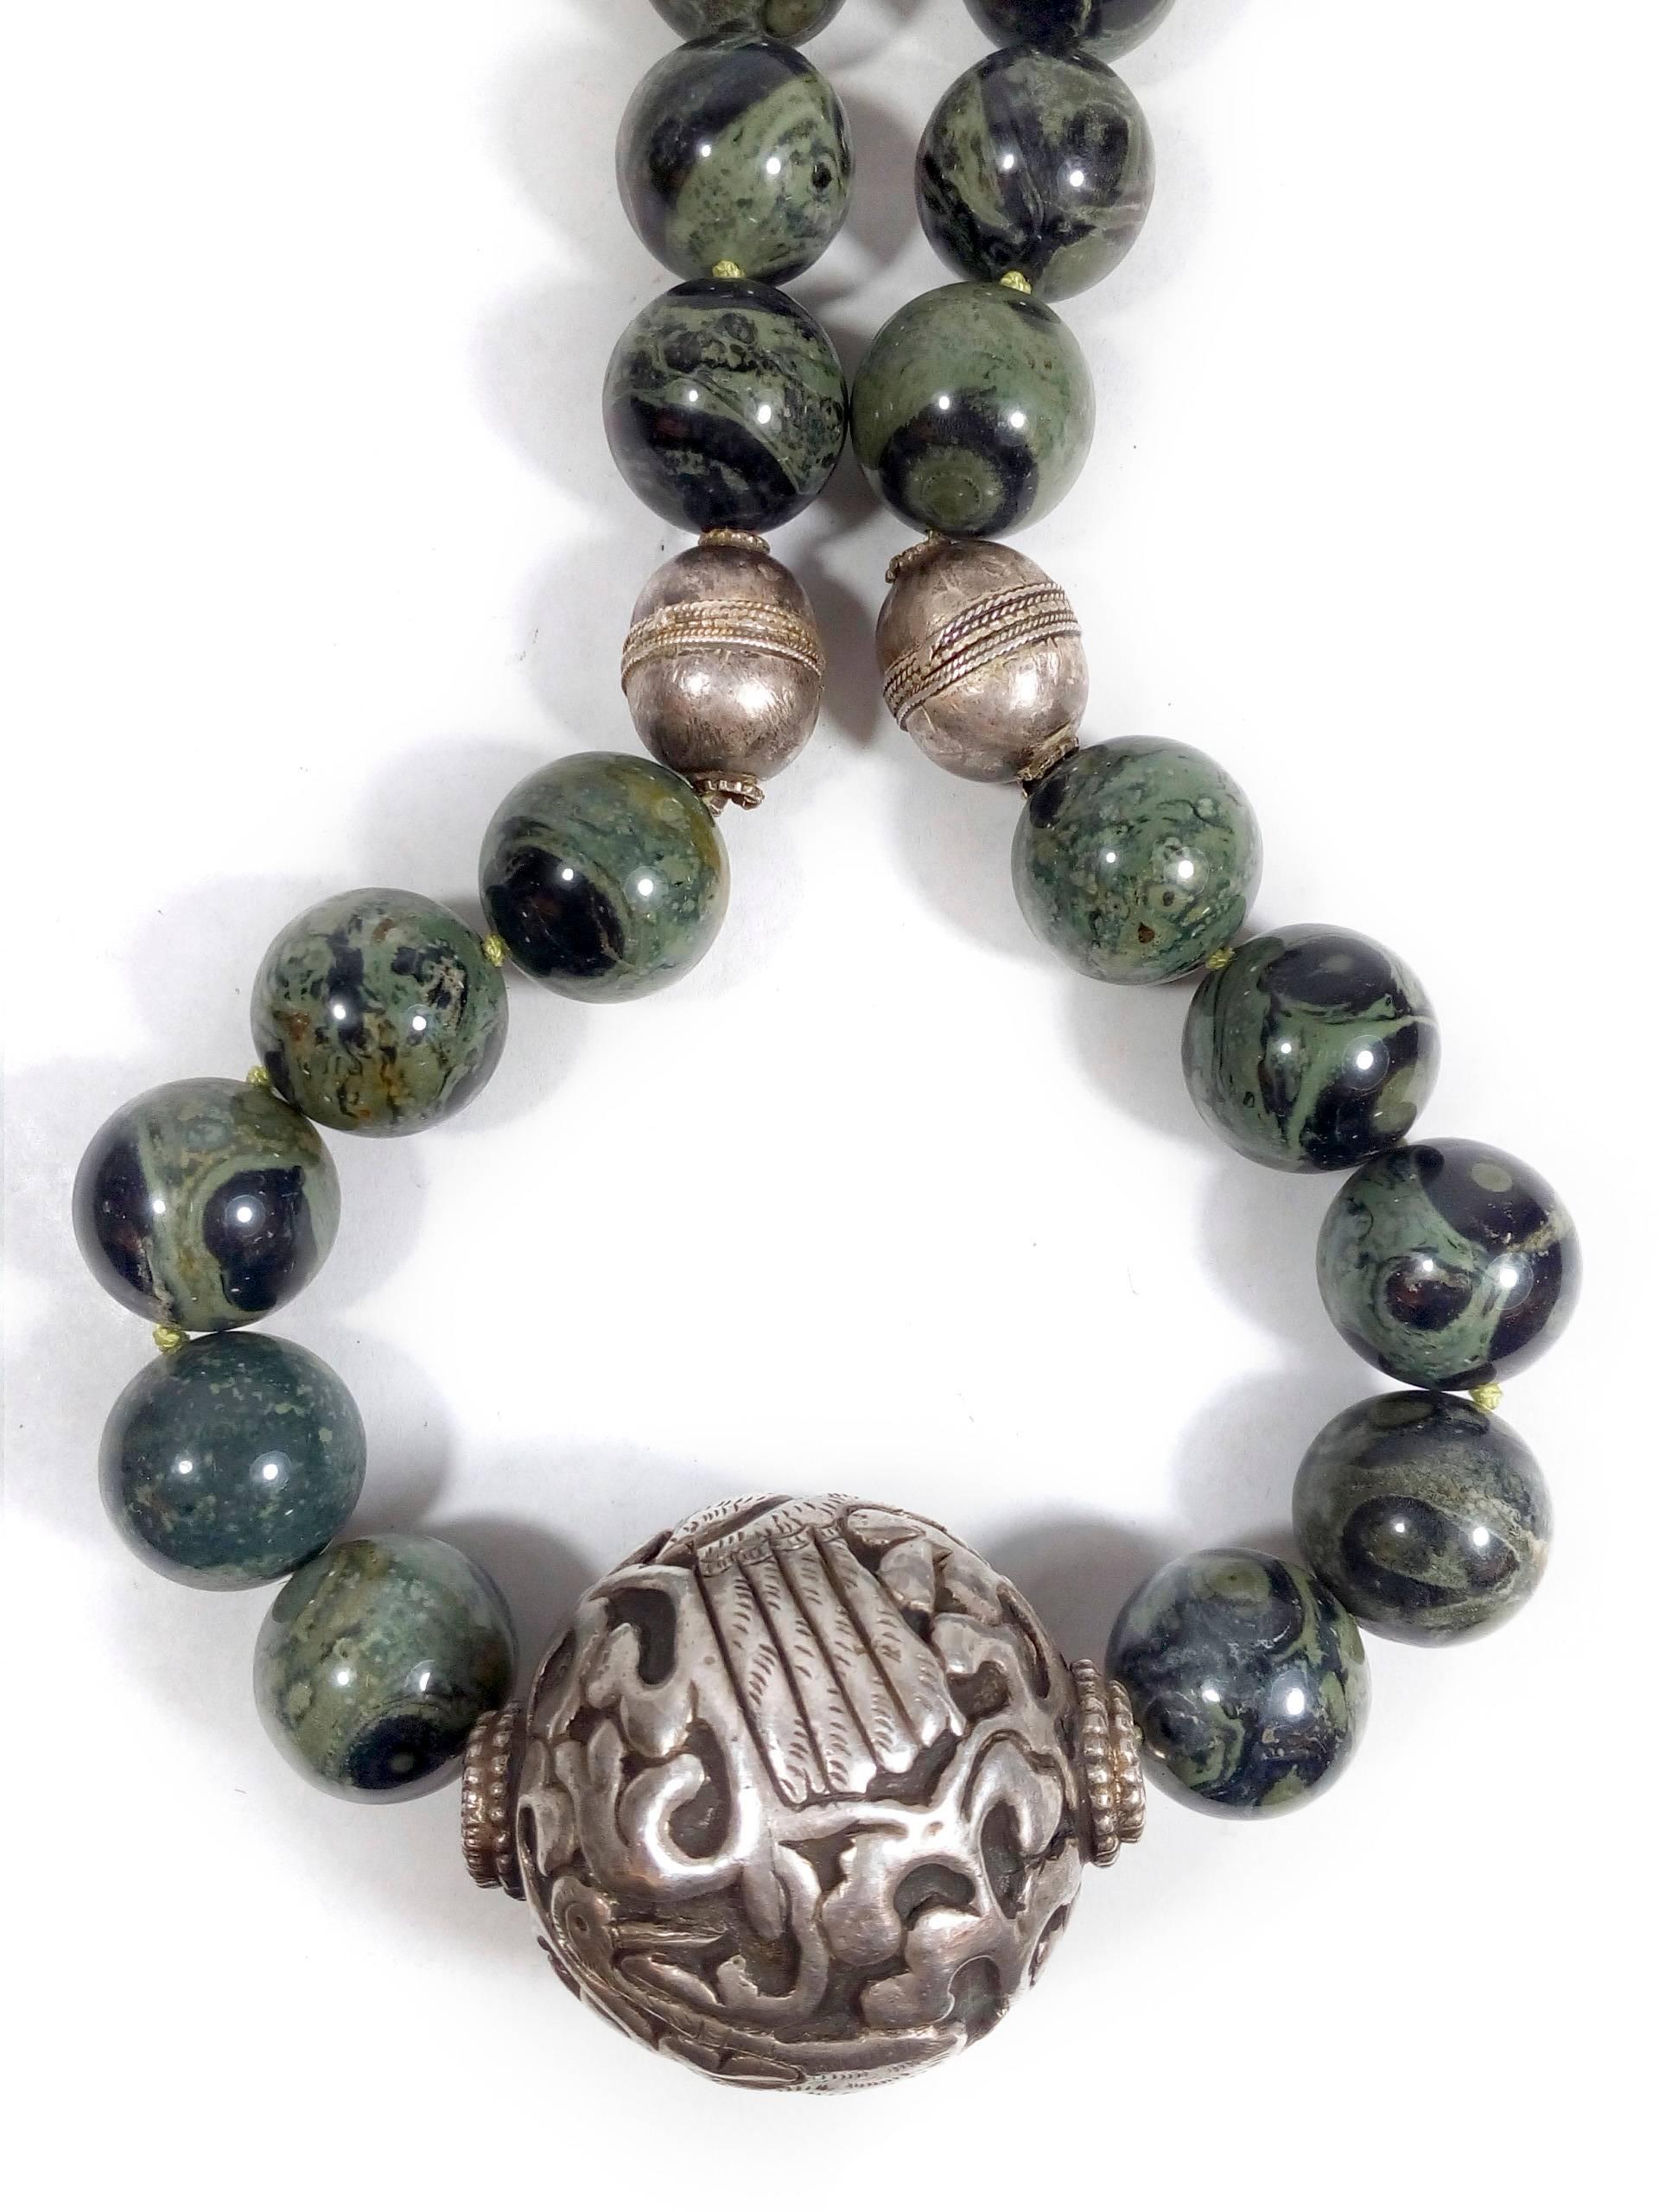 Beautiful large Mexican silver necklace with round polished serpentine speckled stone beads. The central element is a round delicately hand-carved silver piece depicting two large birds standing on a richly leafed tree, besides the stone beads it